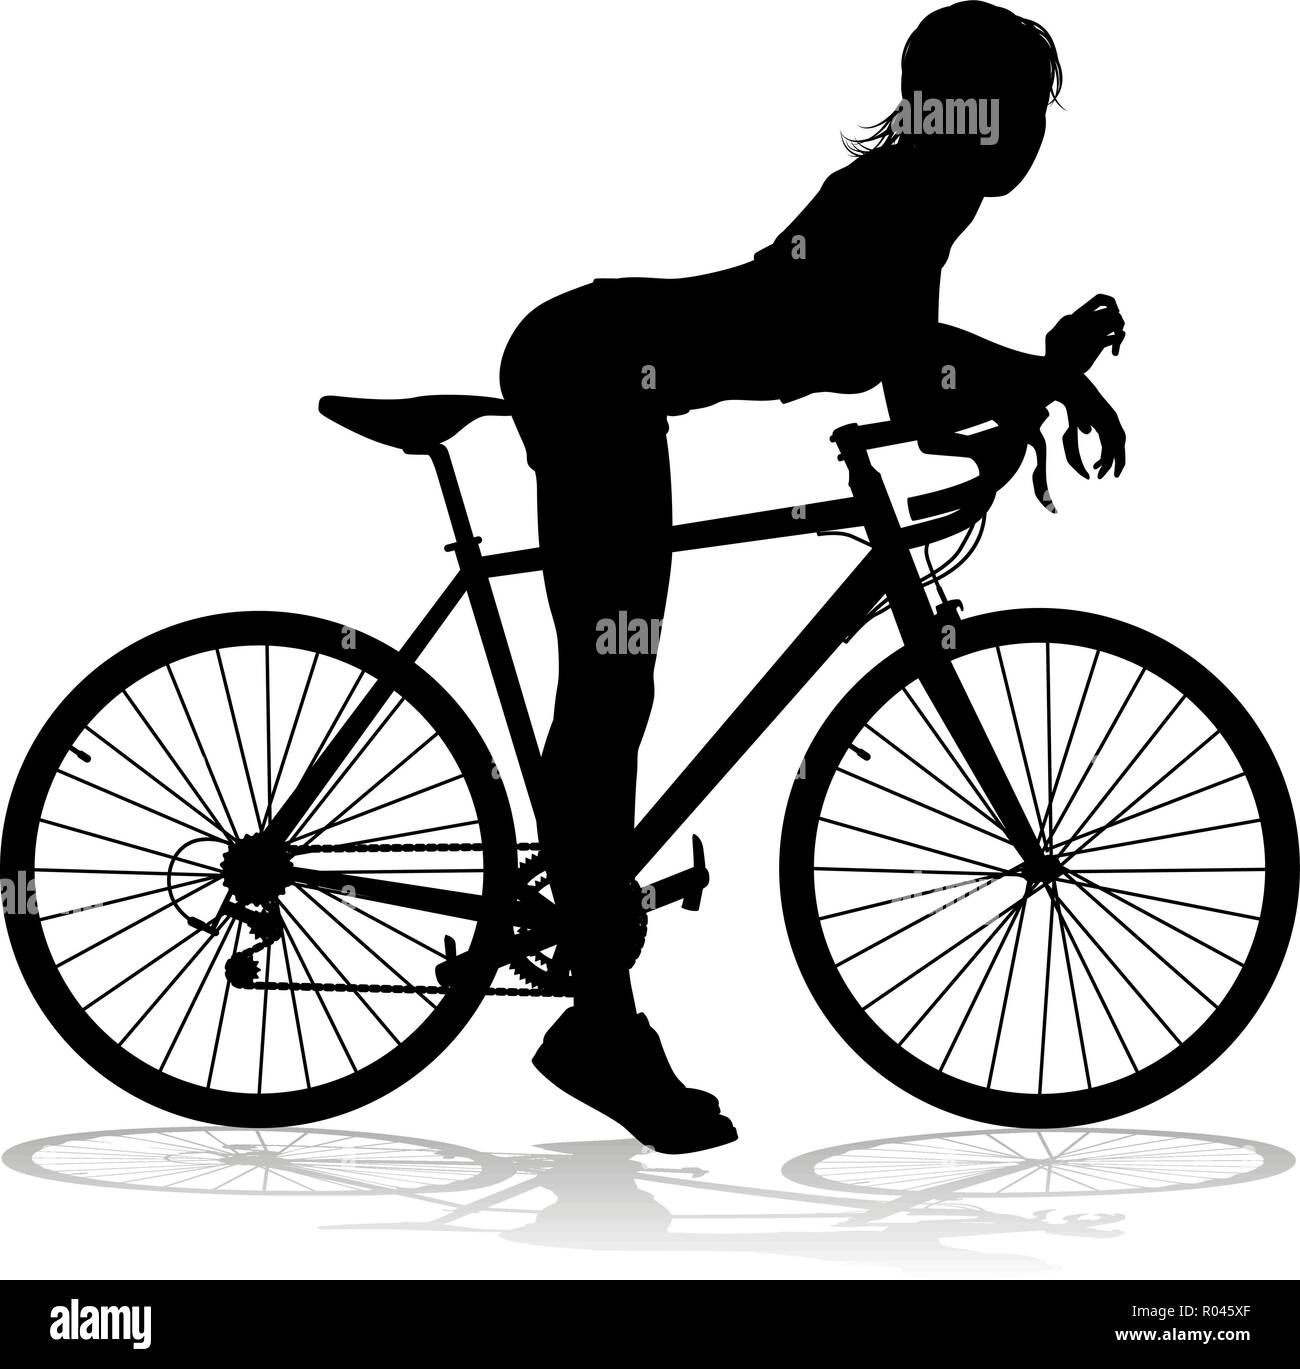 Woman Bike Cyclist Riding Bicycle Silhouette Stock Vector